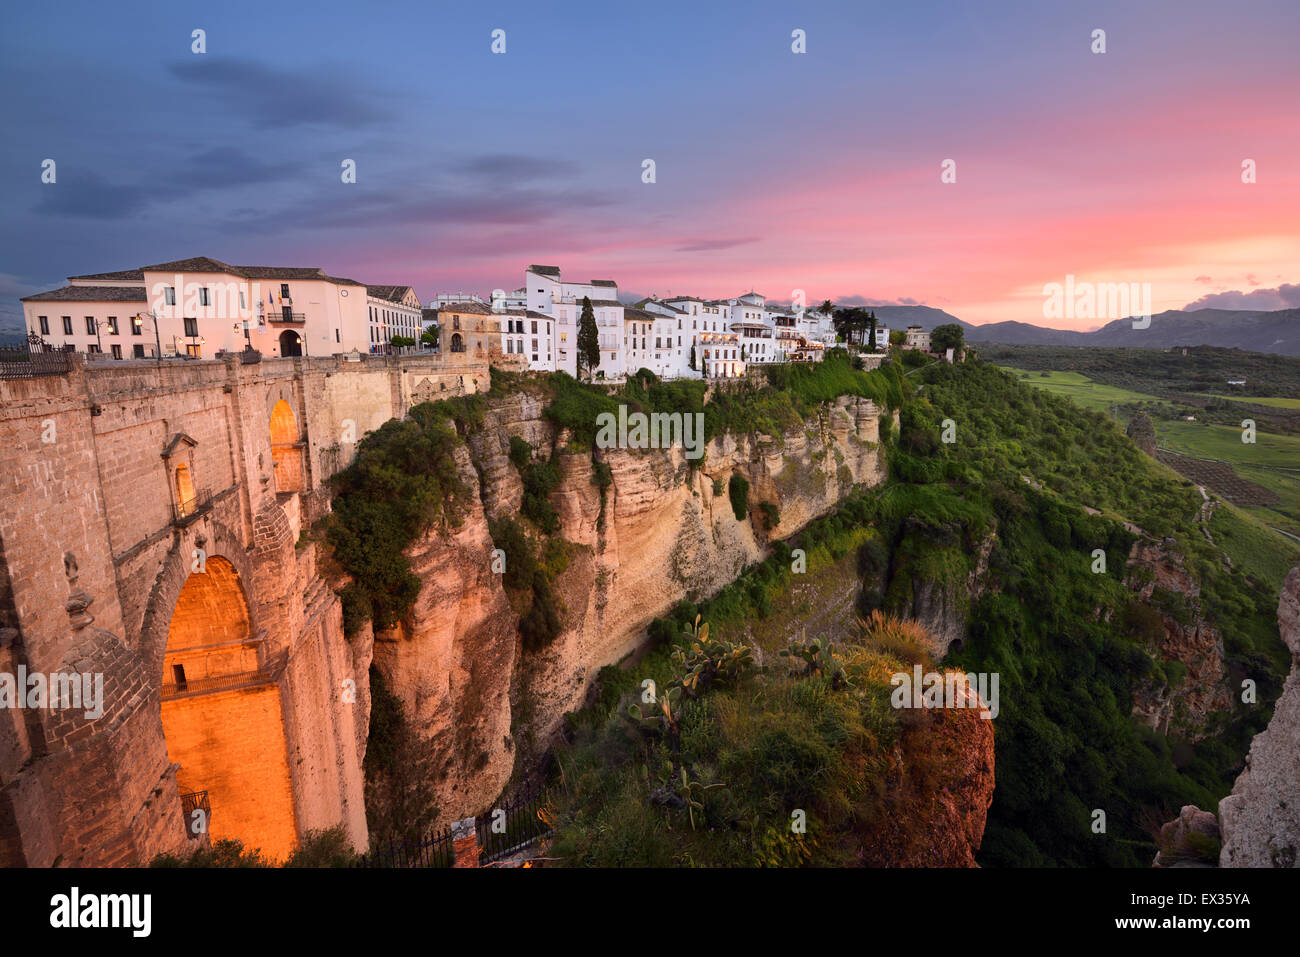 Red sky evening light on white buildings and orange cliffs at El Tajo Gorge Ronda Spain at the Guadalevin river gorge Stock Photo